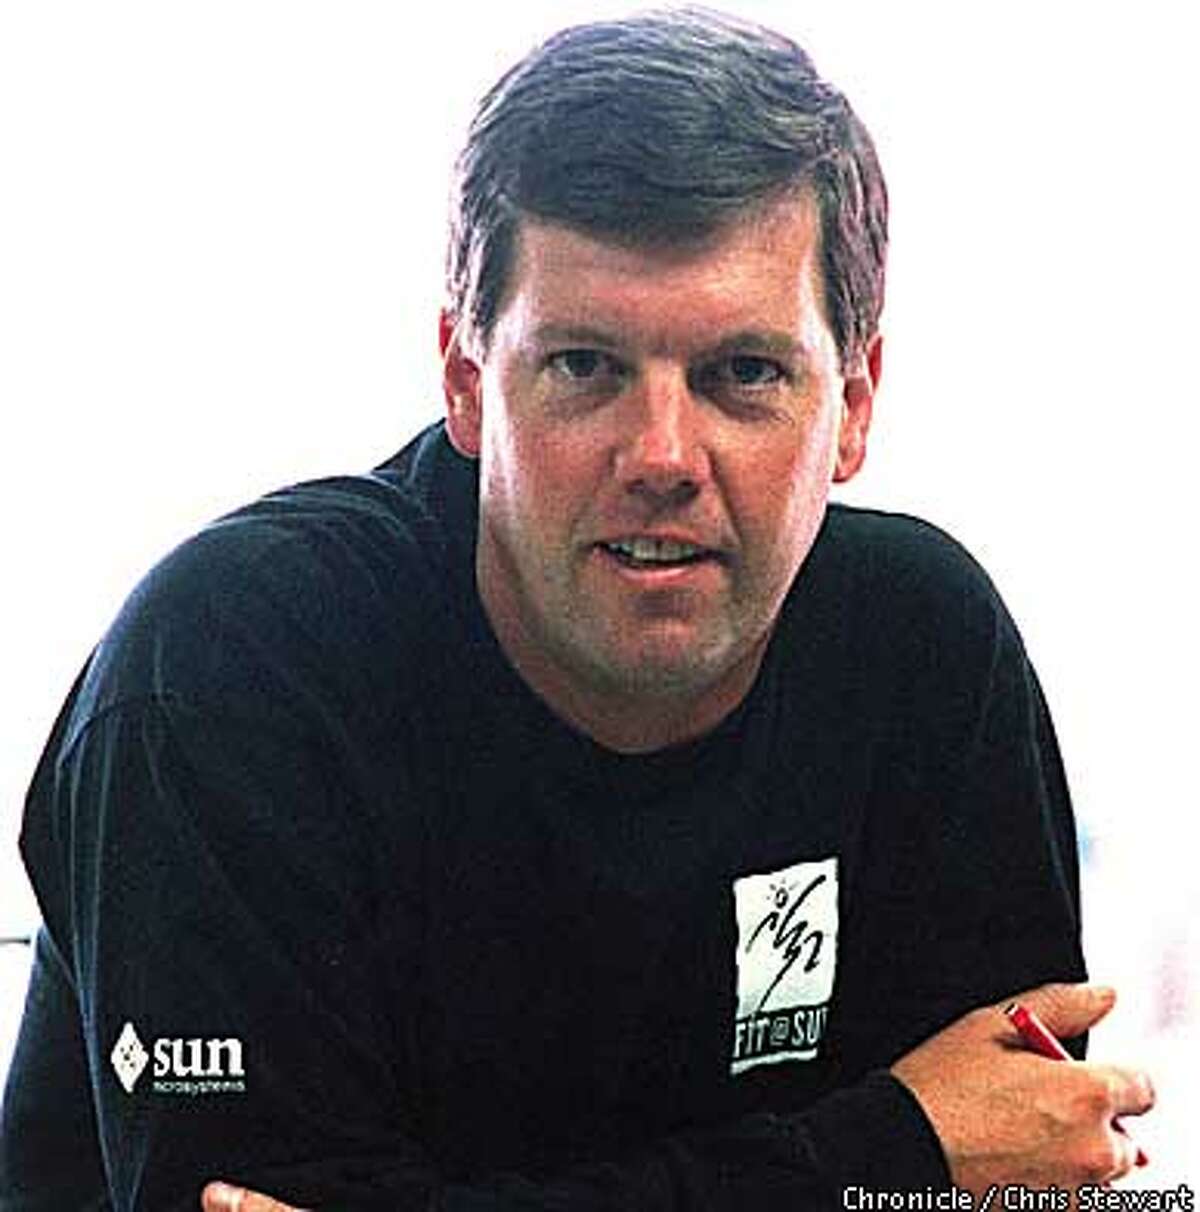 CEO Scott McNealy says Sun is in a "cave-to-cave, bayonets-fixed kind of warfare." Chronicle photo by Chris Stewart